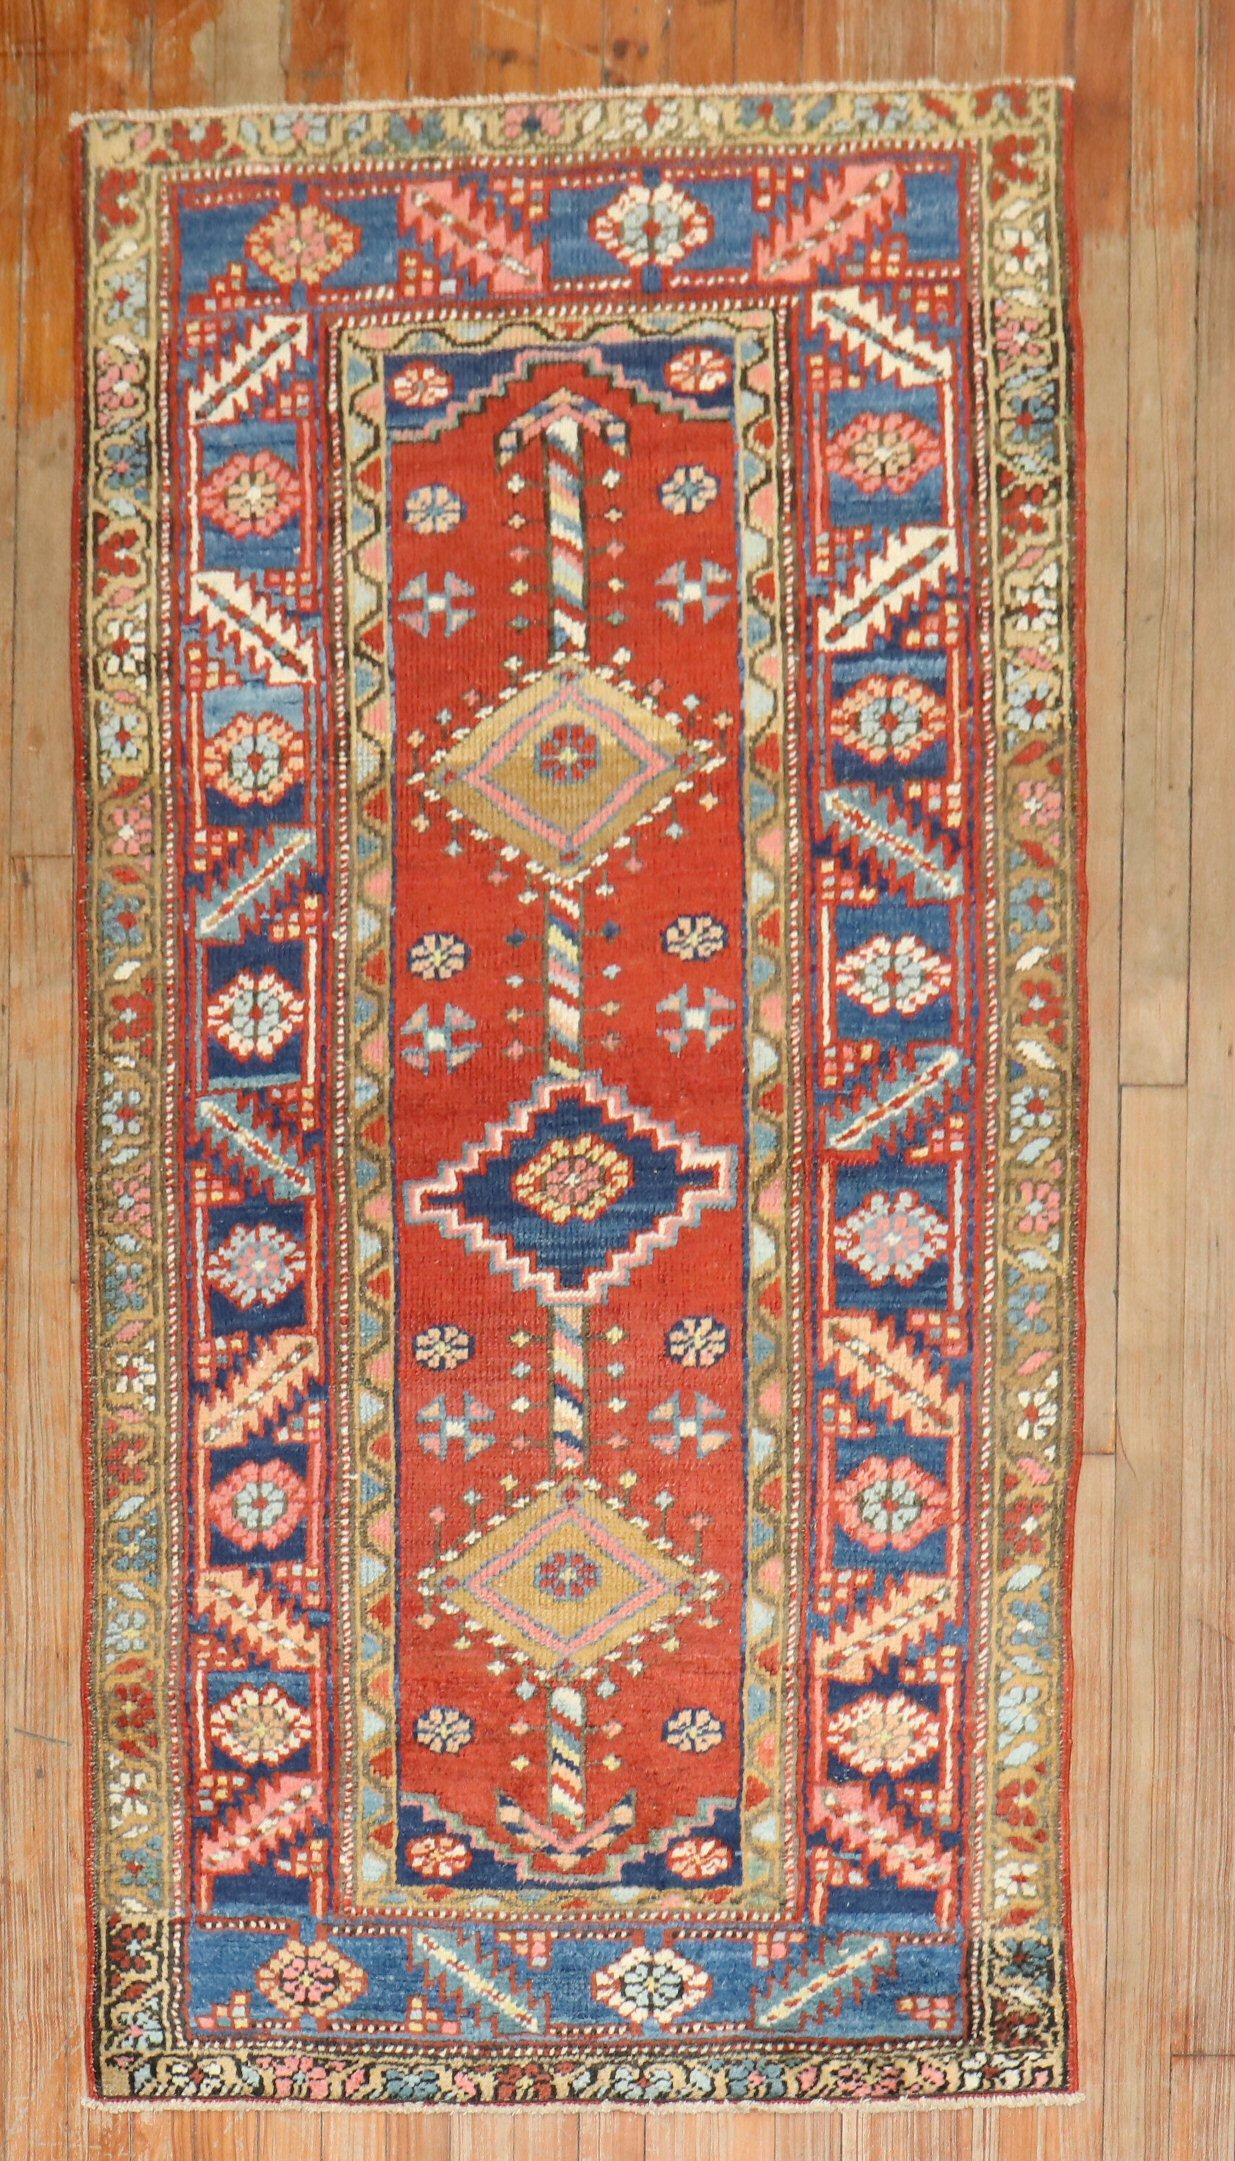 An early 20th-centuryPersian heriz rug. 

Measures: 2'11'' x 5'9''

Heriz carpets are beloved for their versatility. Their geometry complements modern furnishings and their warm colors and artistic depth enhance antiques of all kinds. Their richness